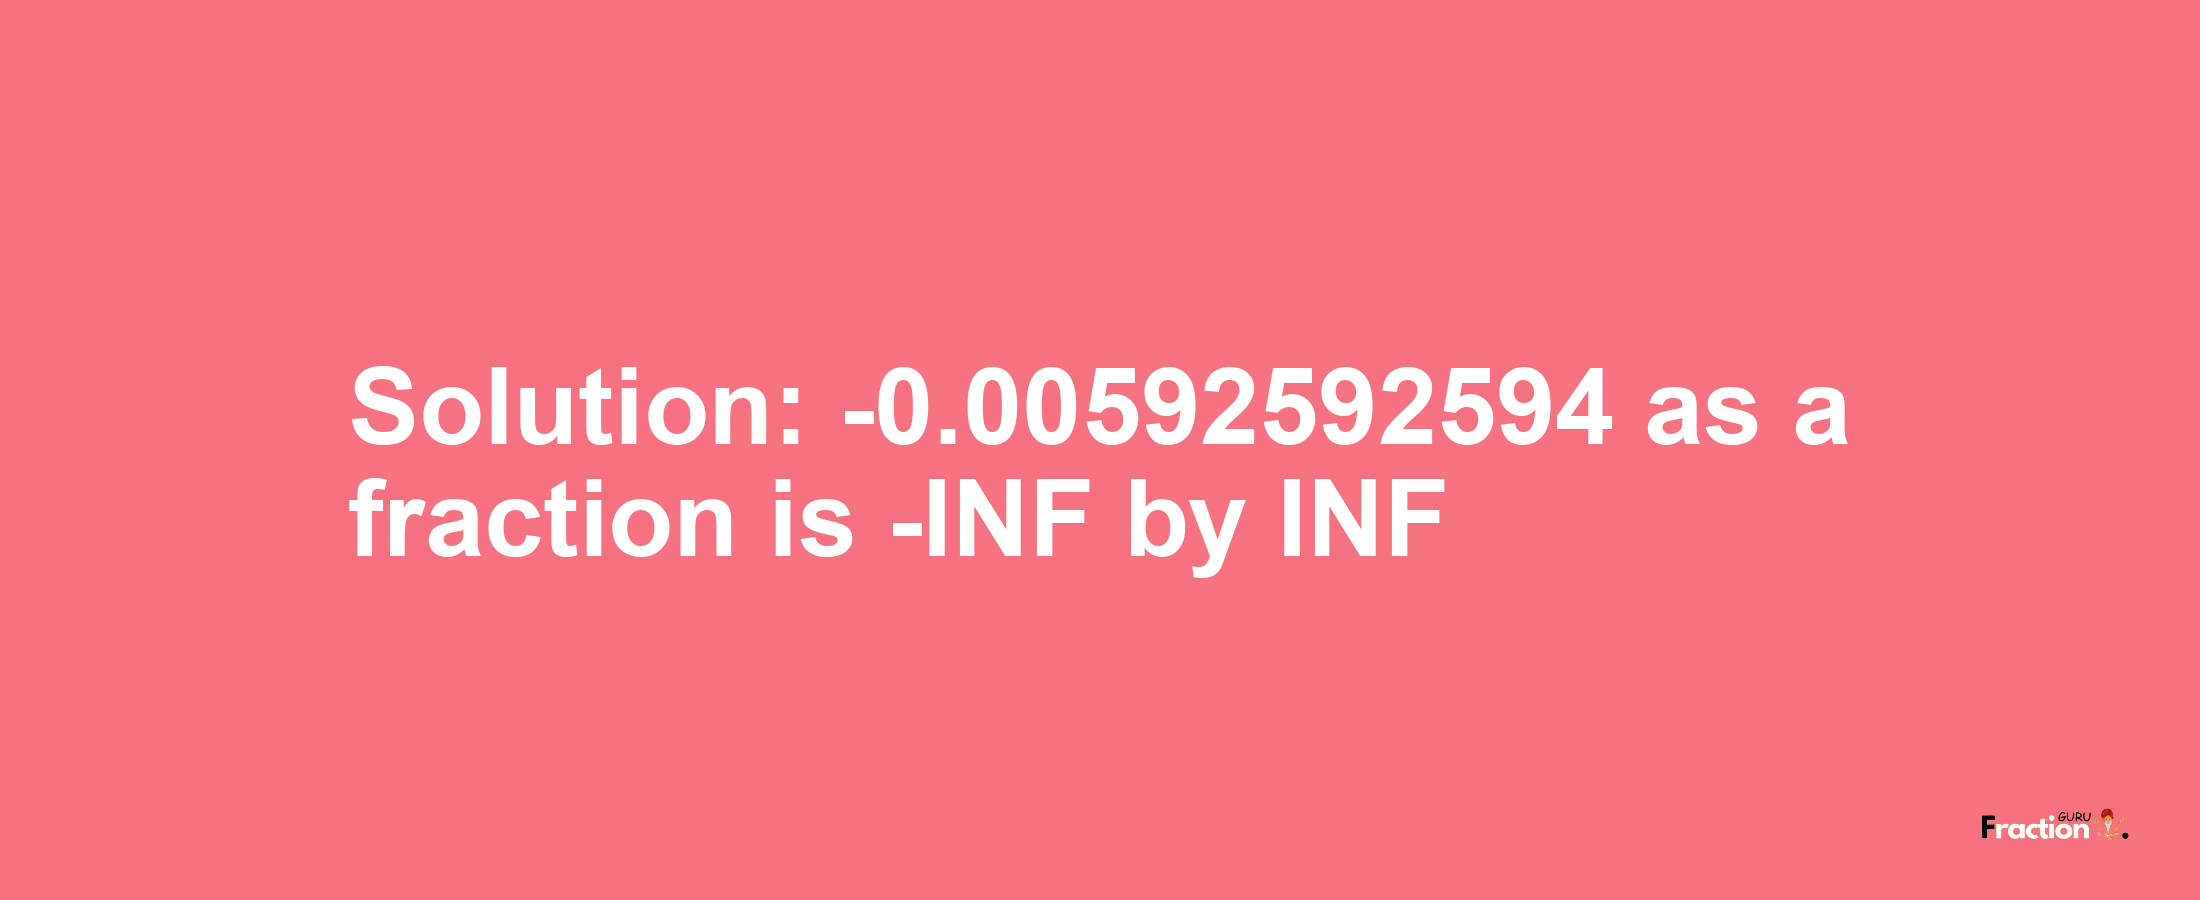 Solution:-0.00592592594 as a fraction is -INF/INF